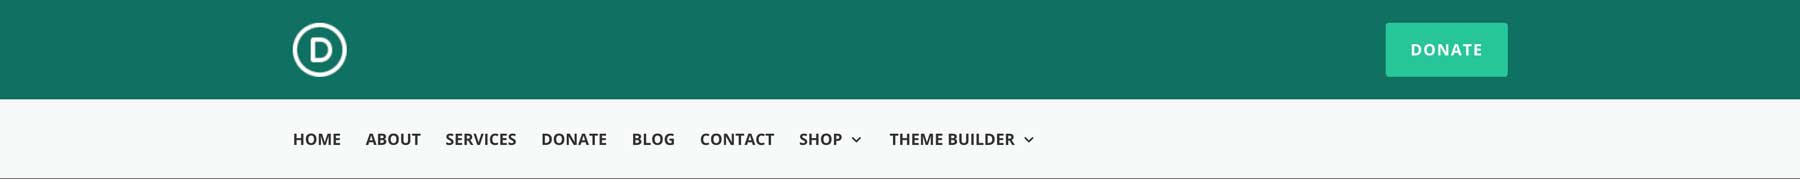 Charity theme builder pack